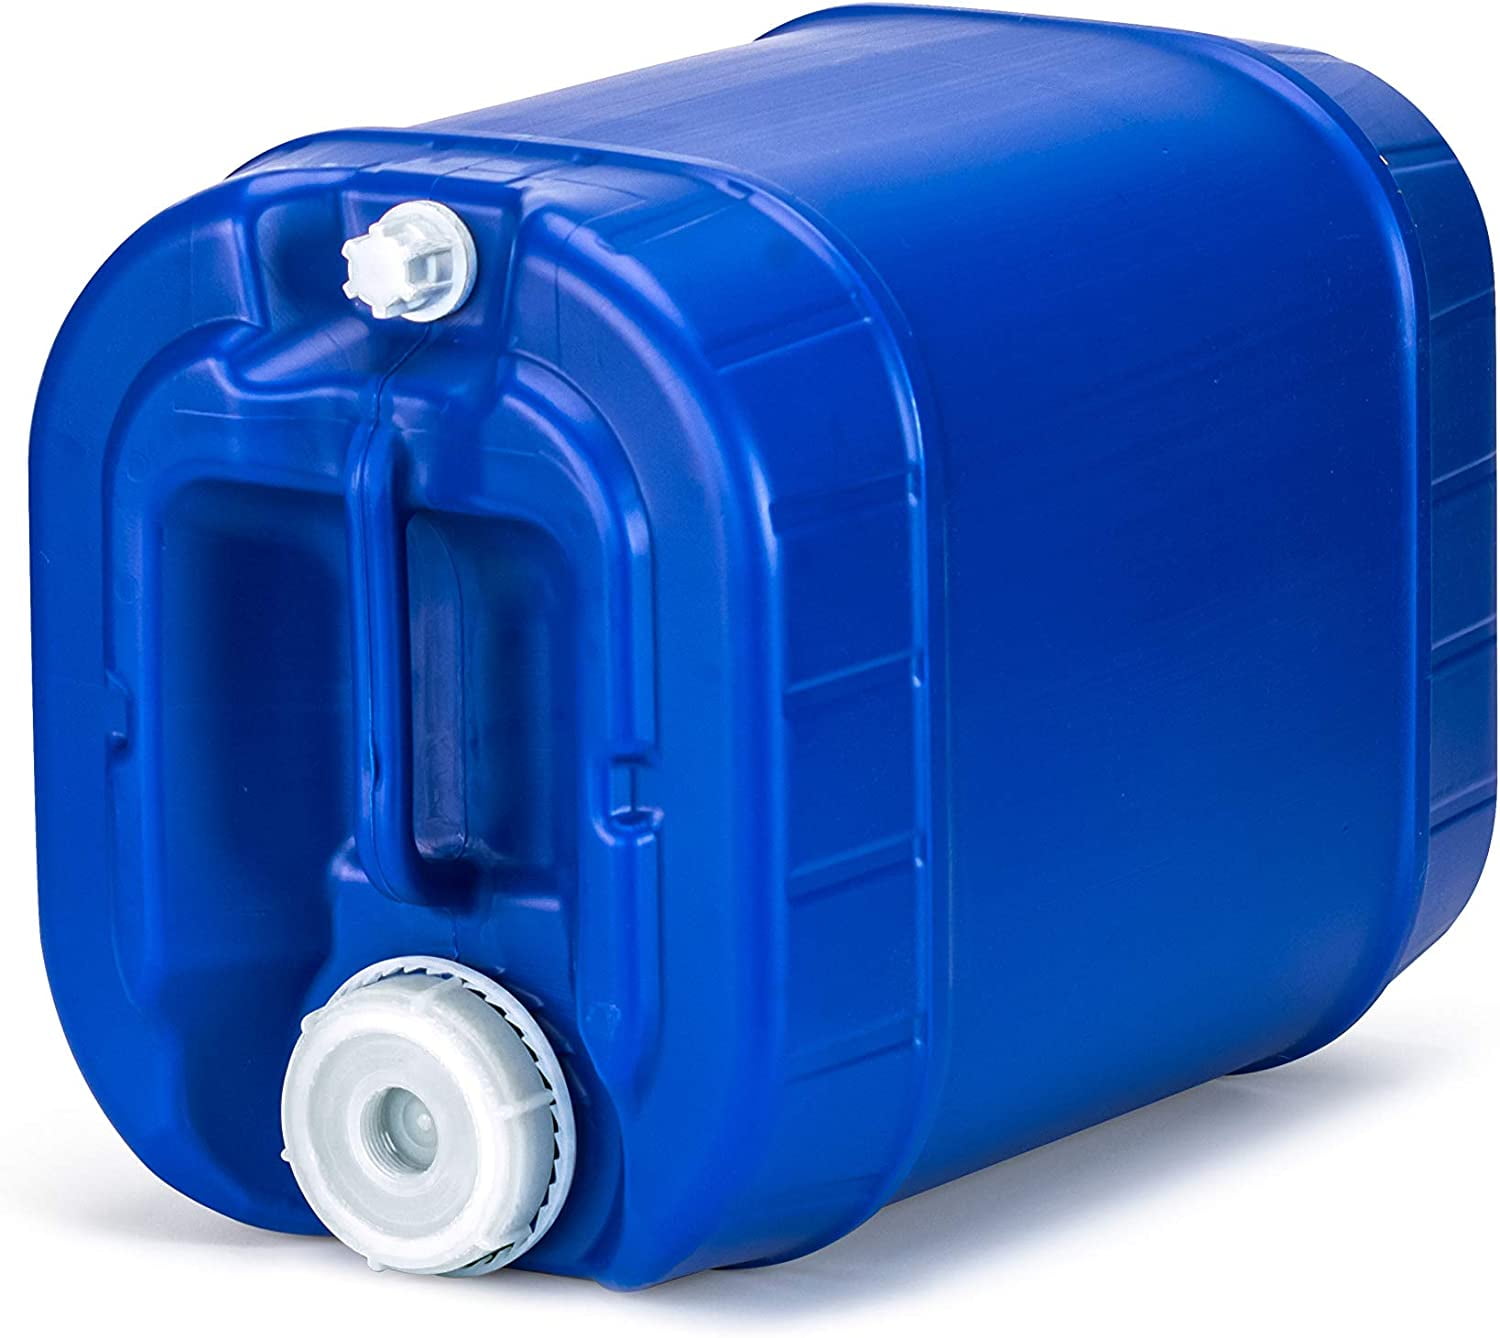 5 Gallon Samson Stackers, Blue, 8 Pack (40 Gallons), Emergency Water  Storage Kit - New! - Boxed! Includes 1 Spigot and Cap Wrench